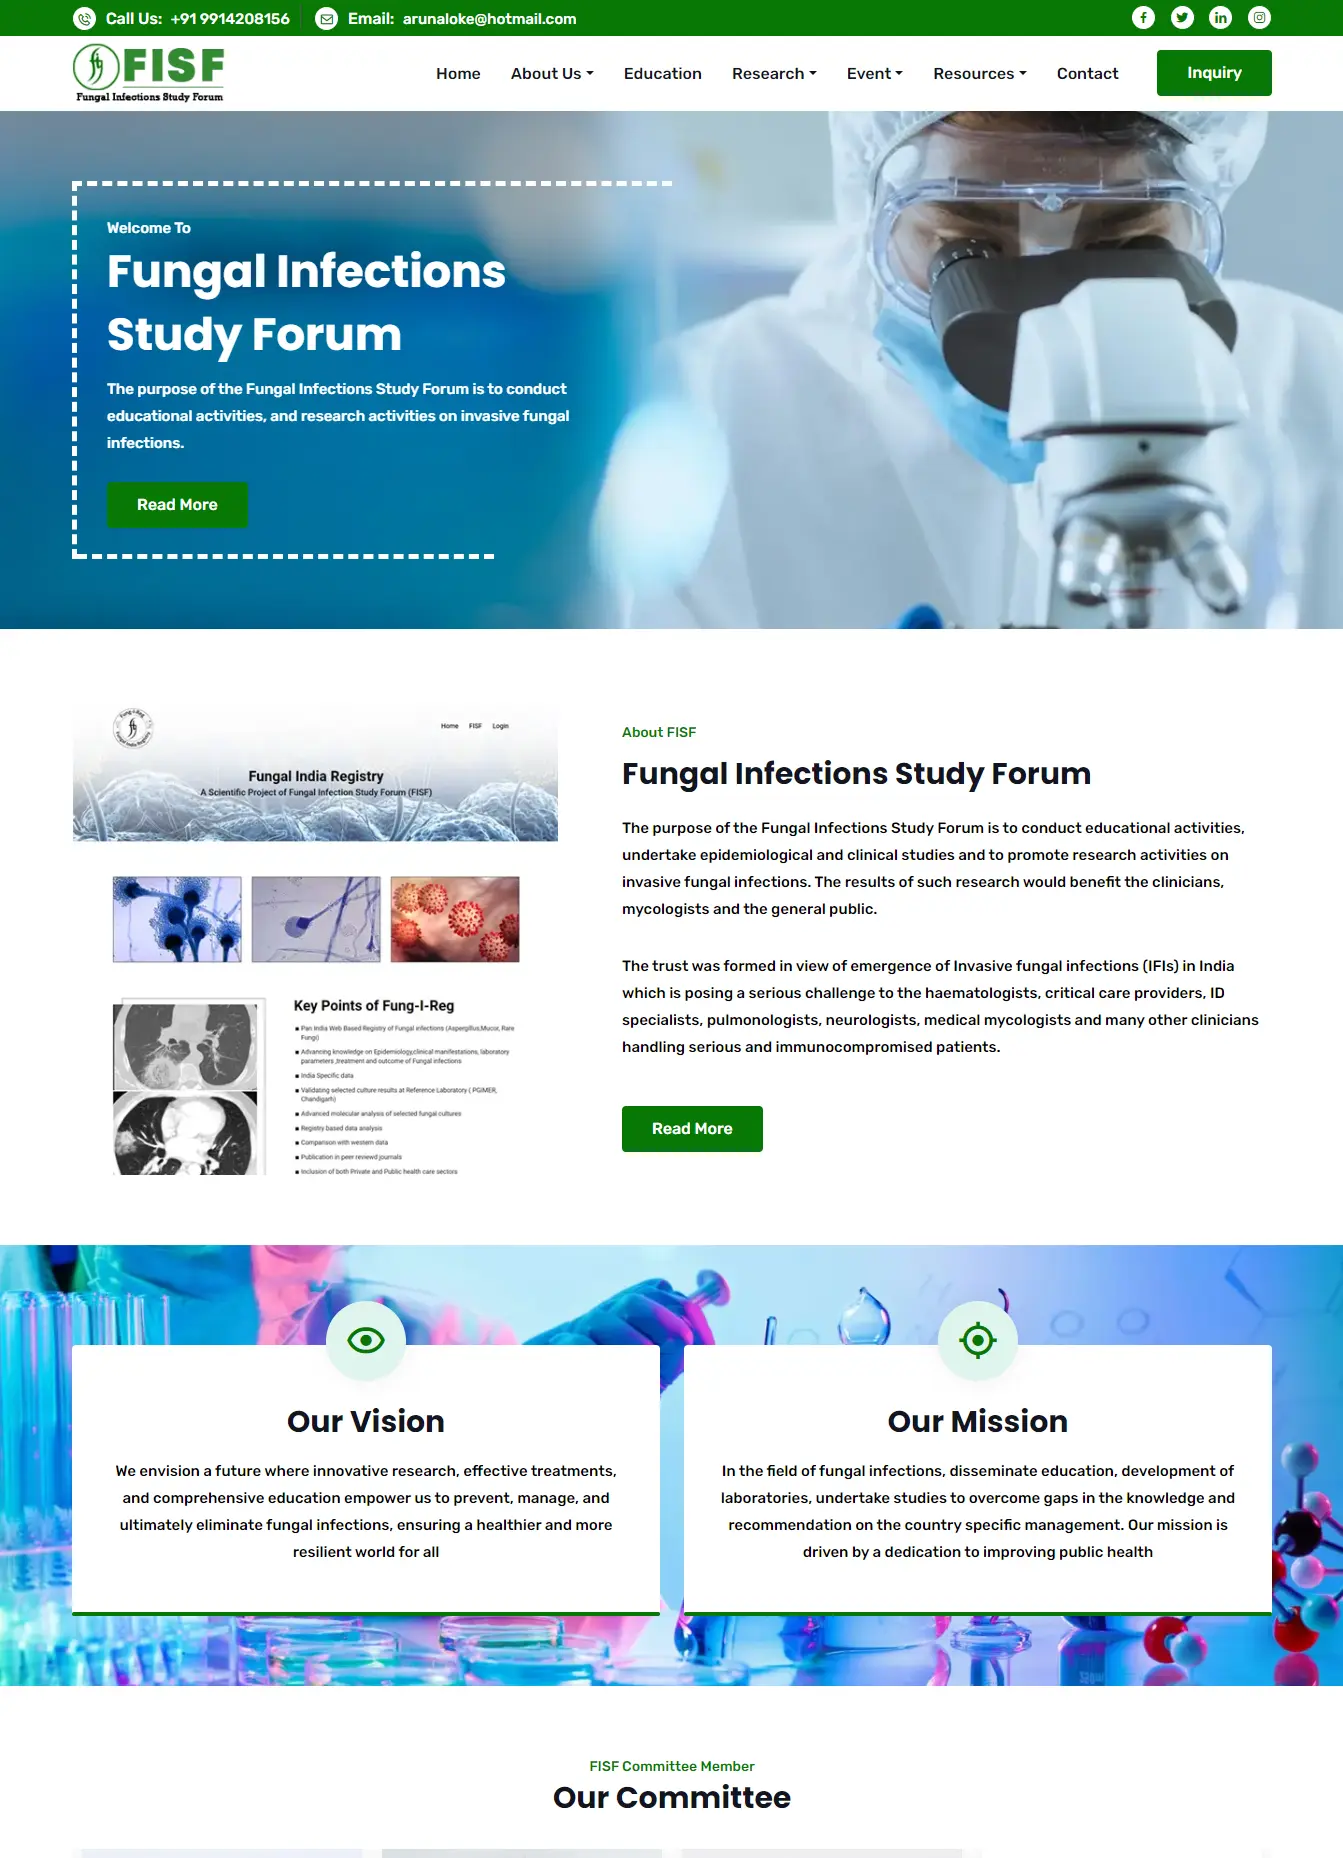 Fungal Infections Study Forum